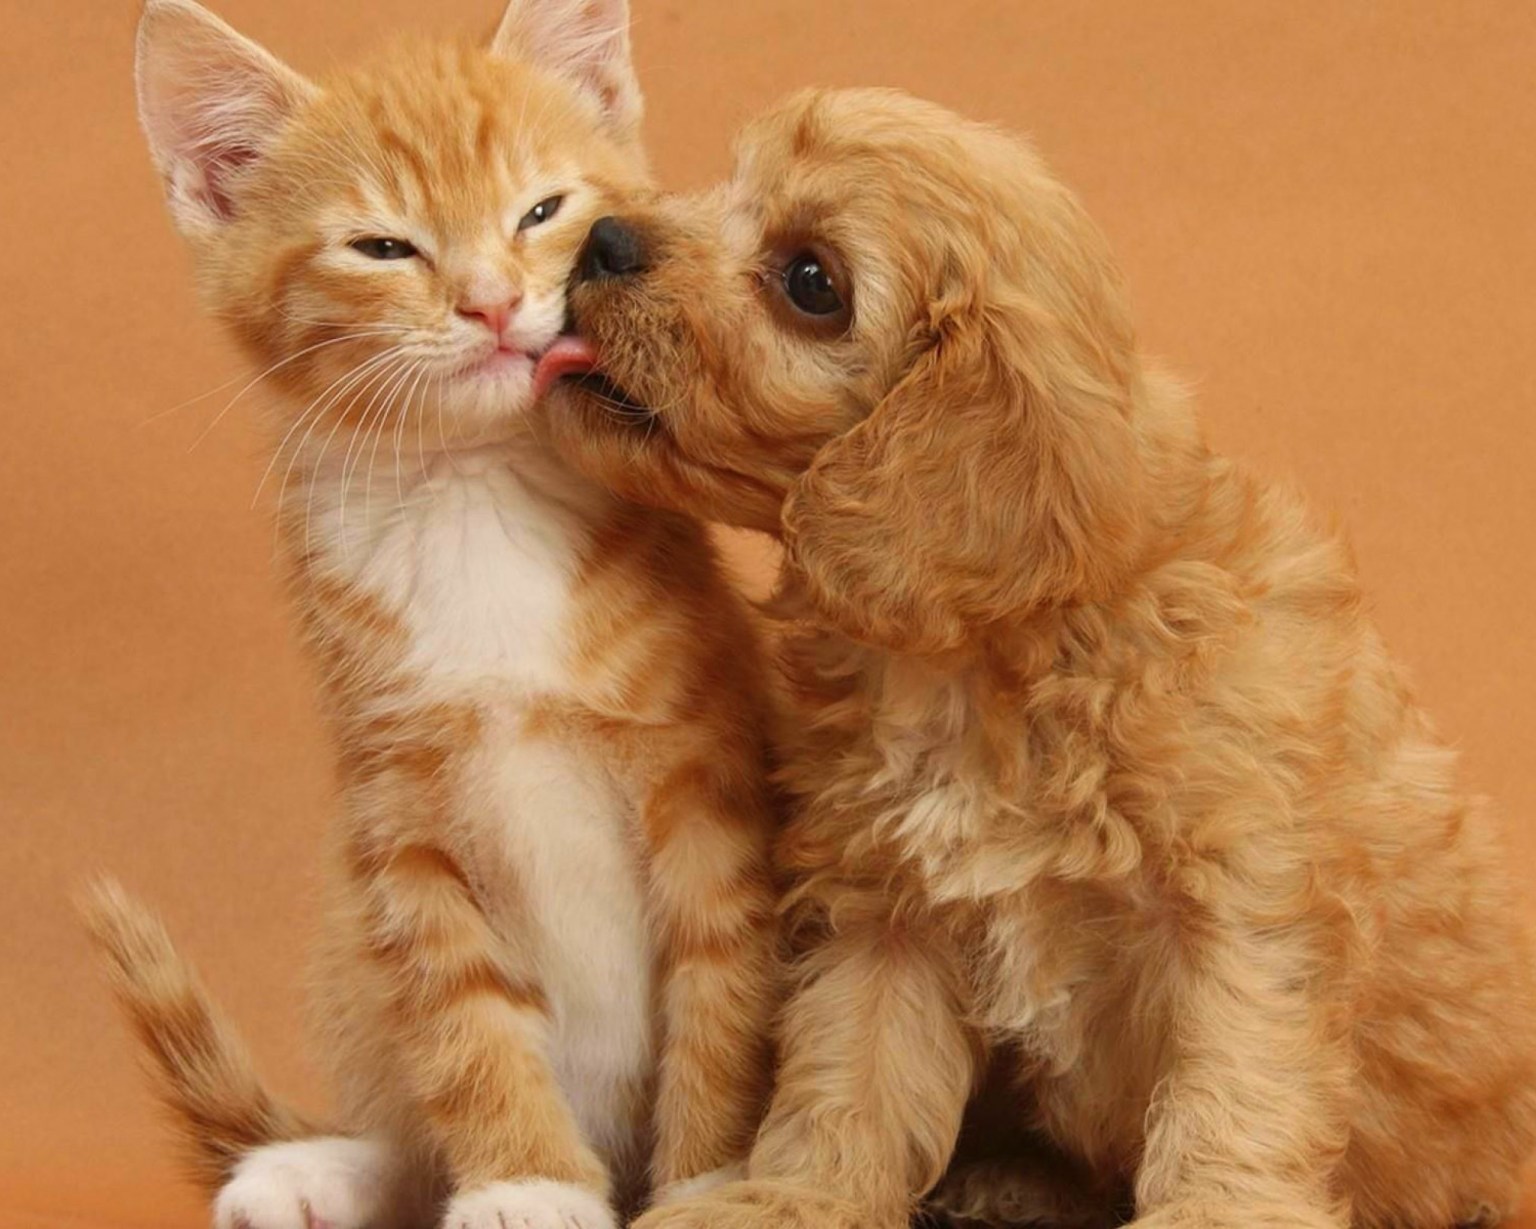 10 SmallSized Dogs That Get Along With Cats